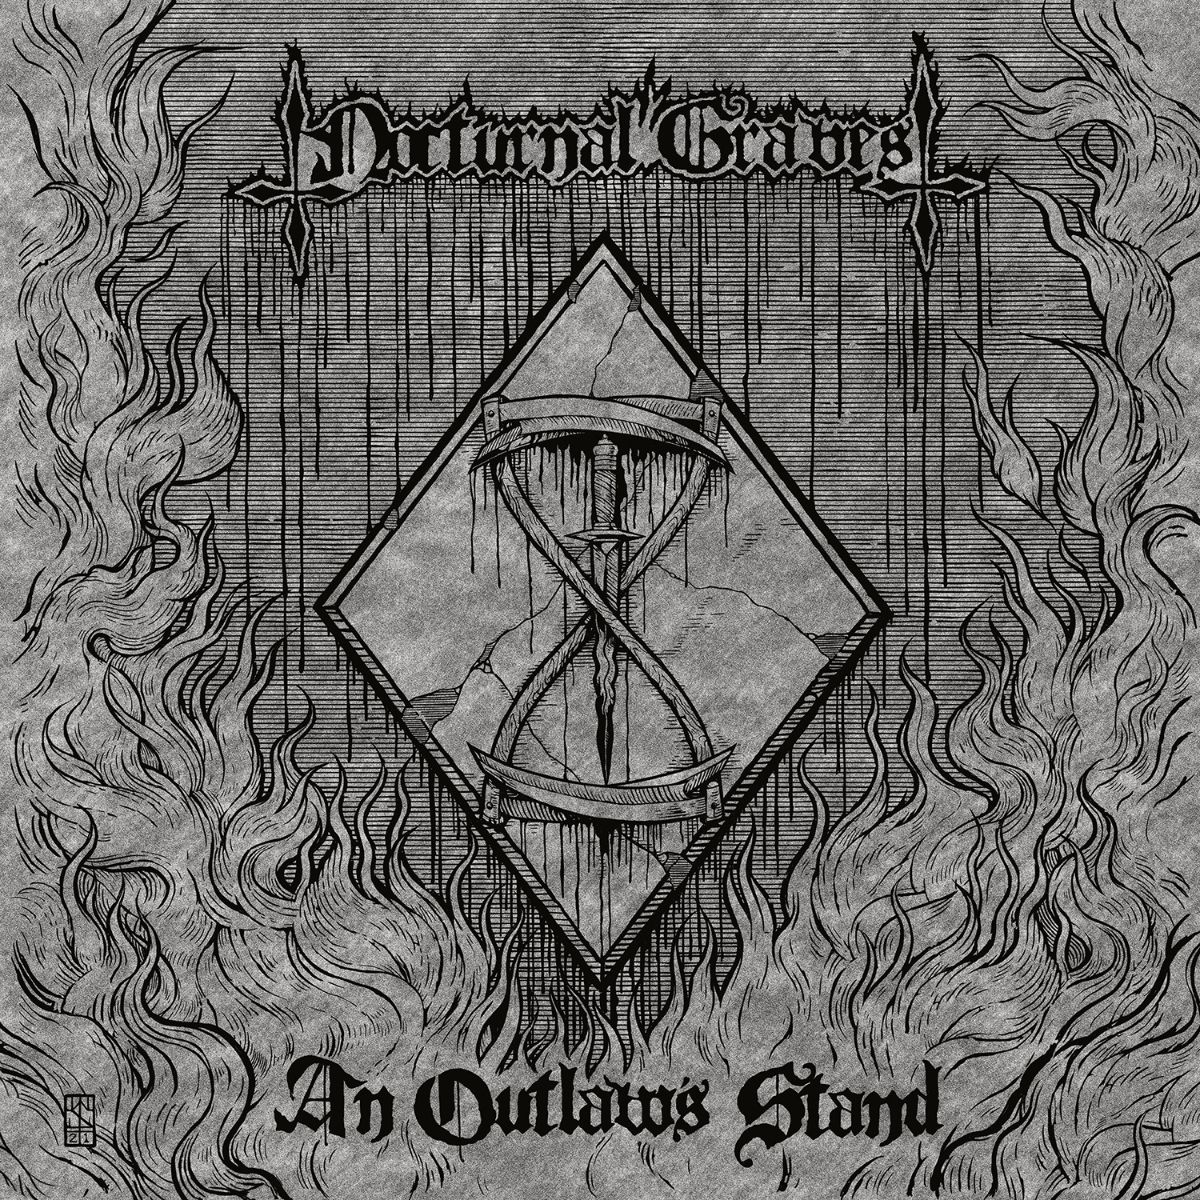 NOCTURNAL GRAVES release new track